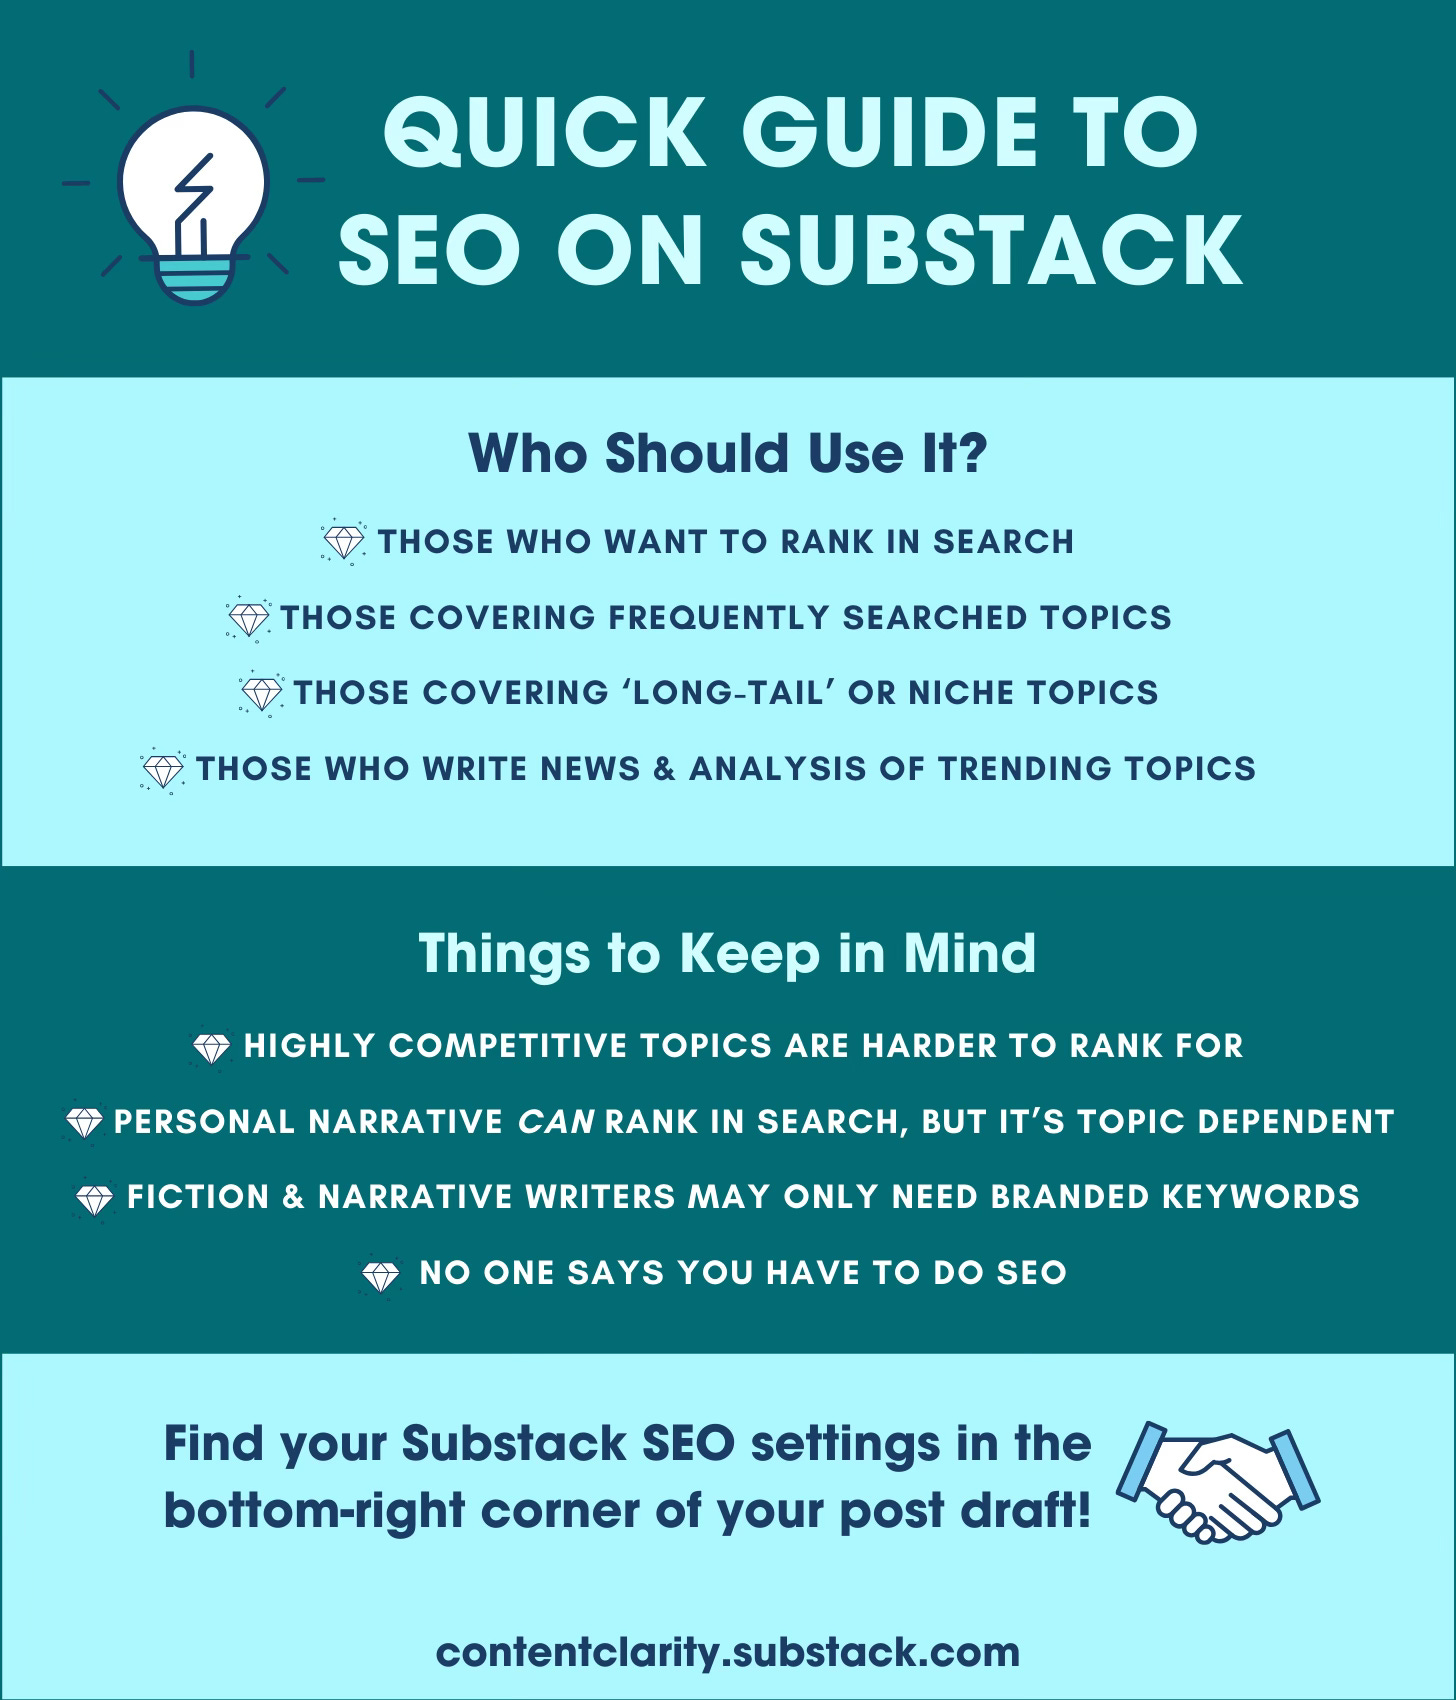 Quick guide to SEO on Substack